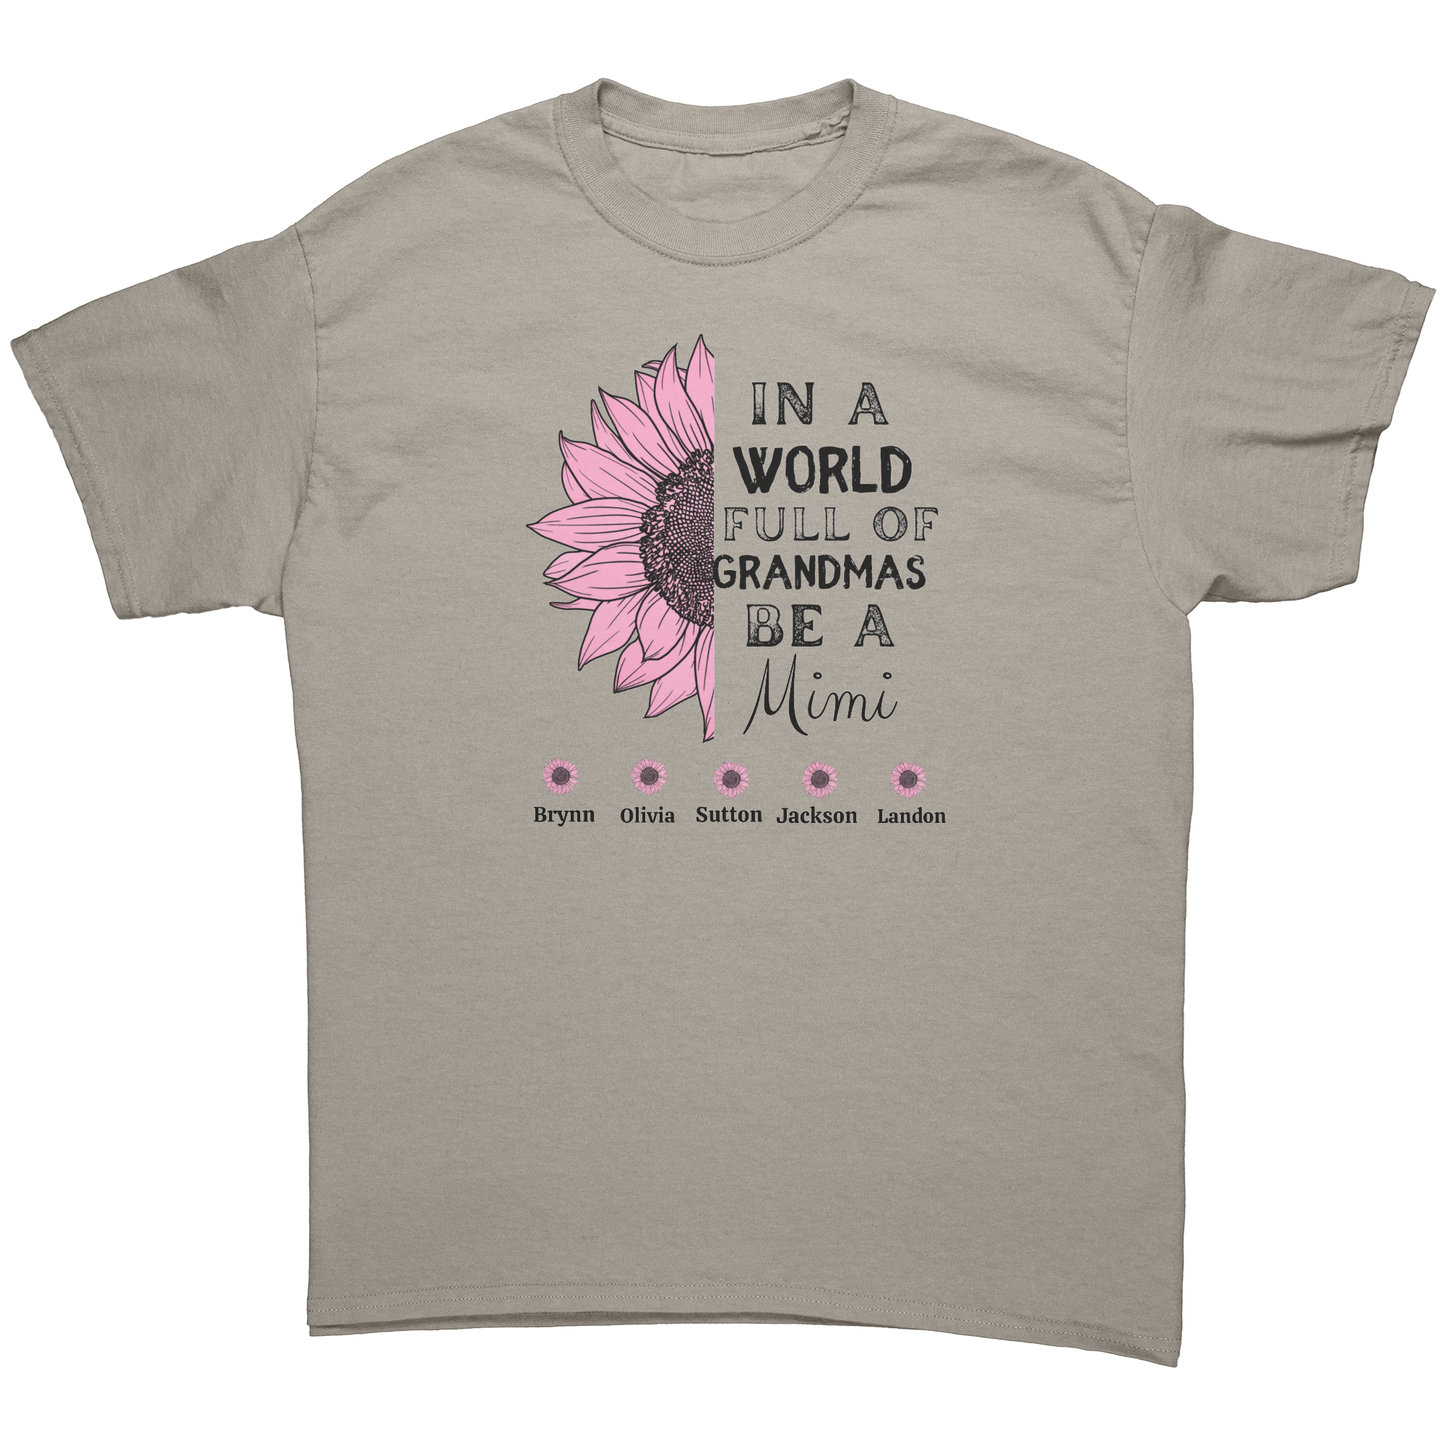 Get trendy with In a world full of Grandmas.... T shirt -  available at Good Gift Company. Grab yours for $10 today!